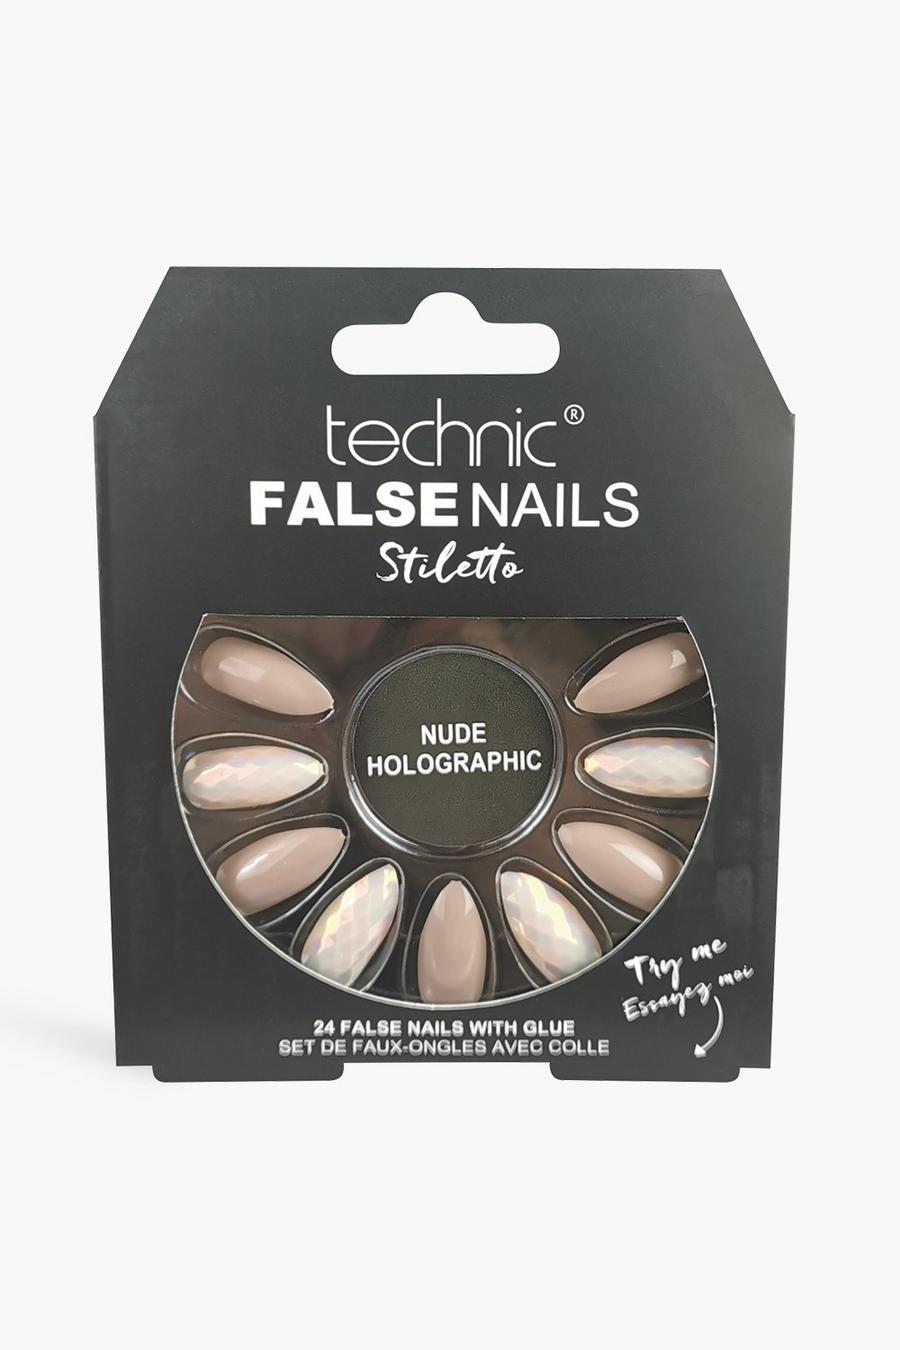 Technic Unghie finte - Stiletto, Nude Holographic image number 1